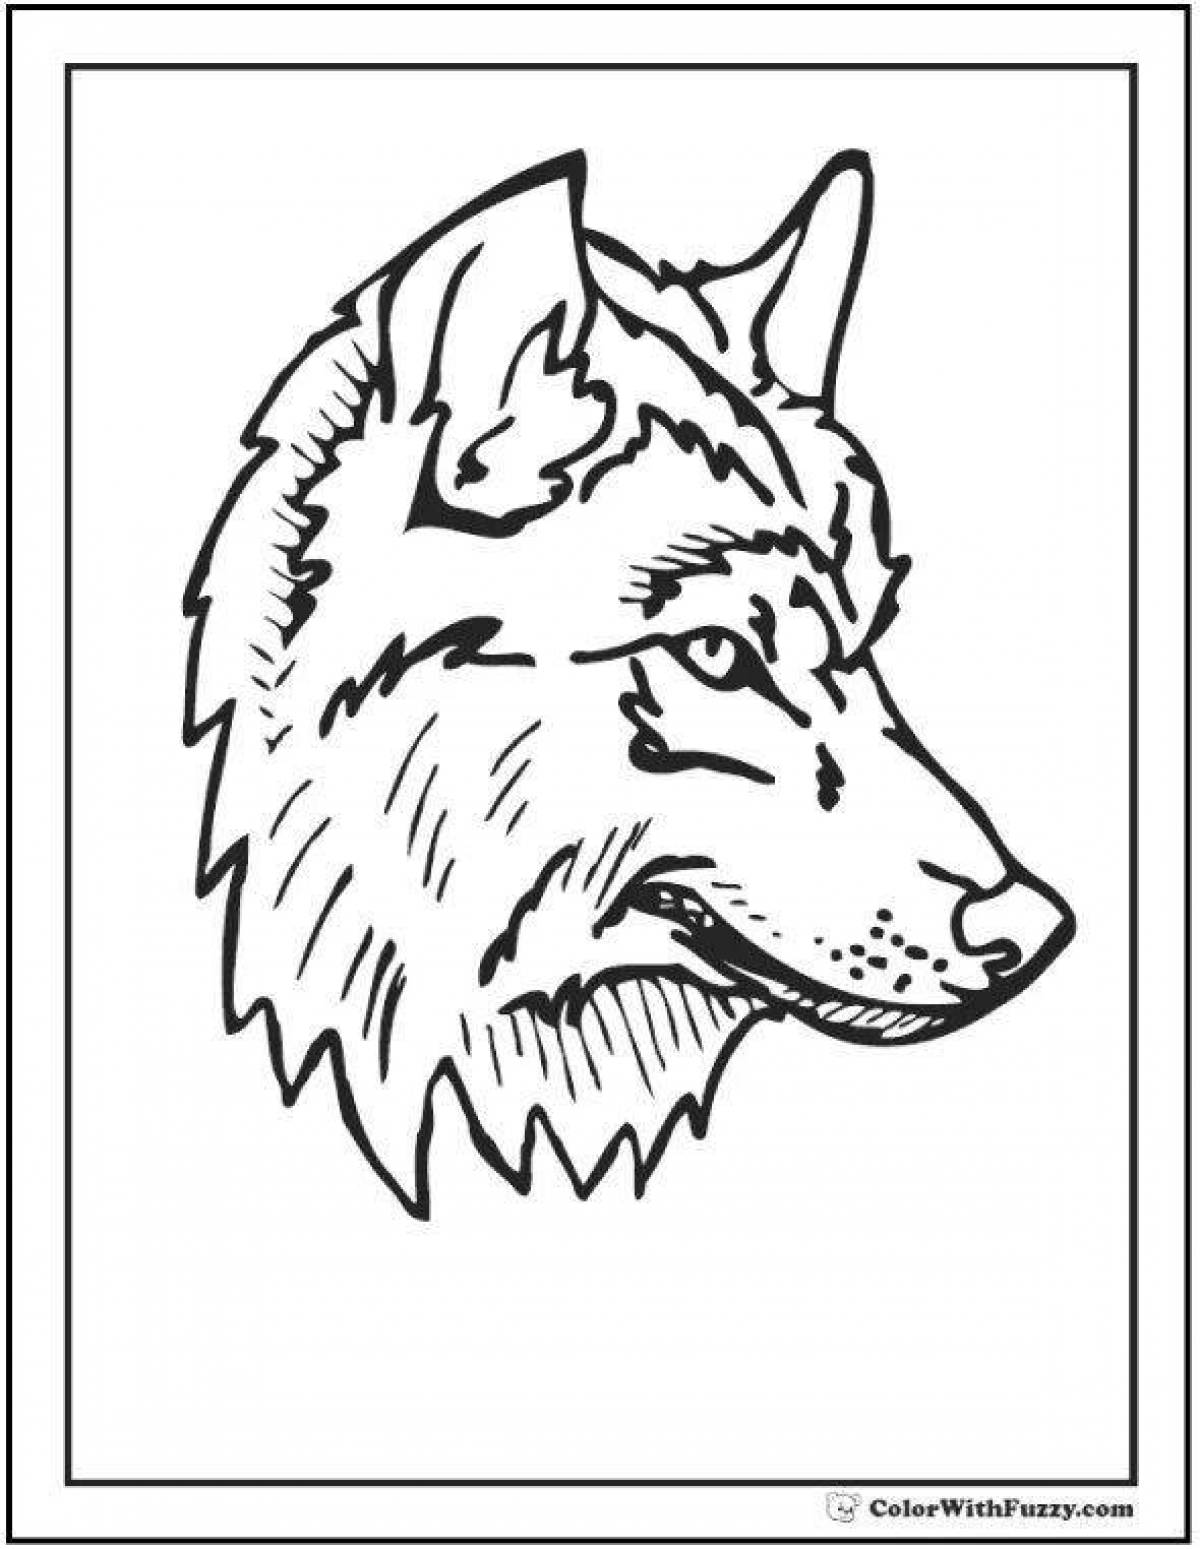 Dazzling wolf head coloring book